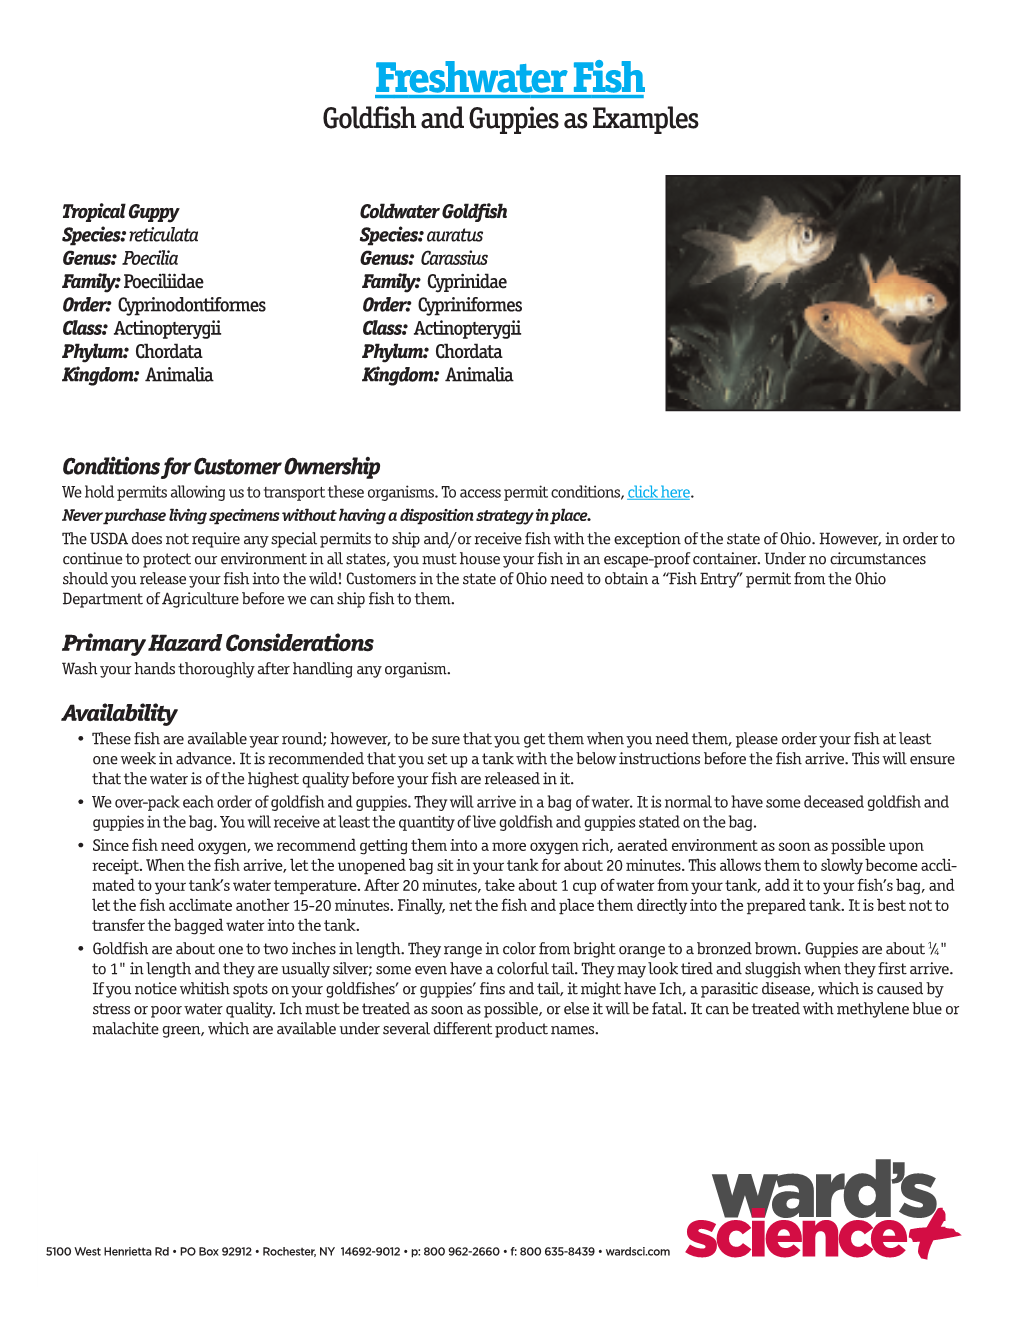 Freshwater Fish Goldfish and Guppies As Examples